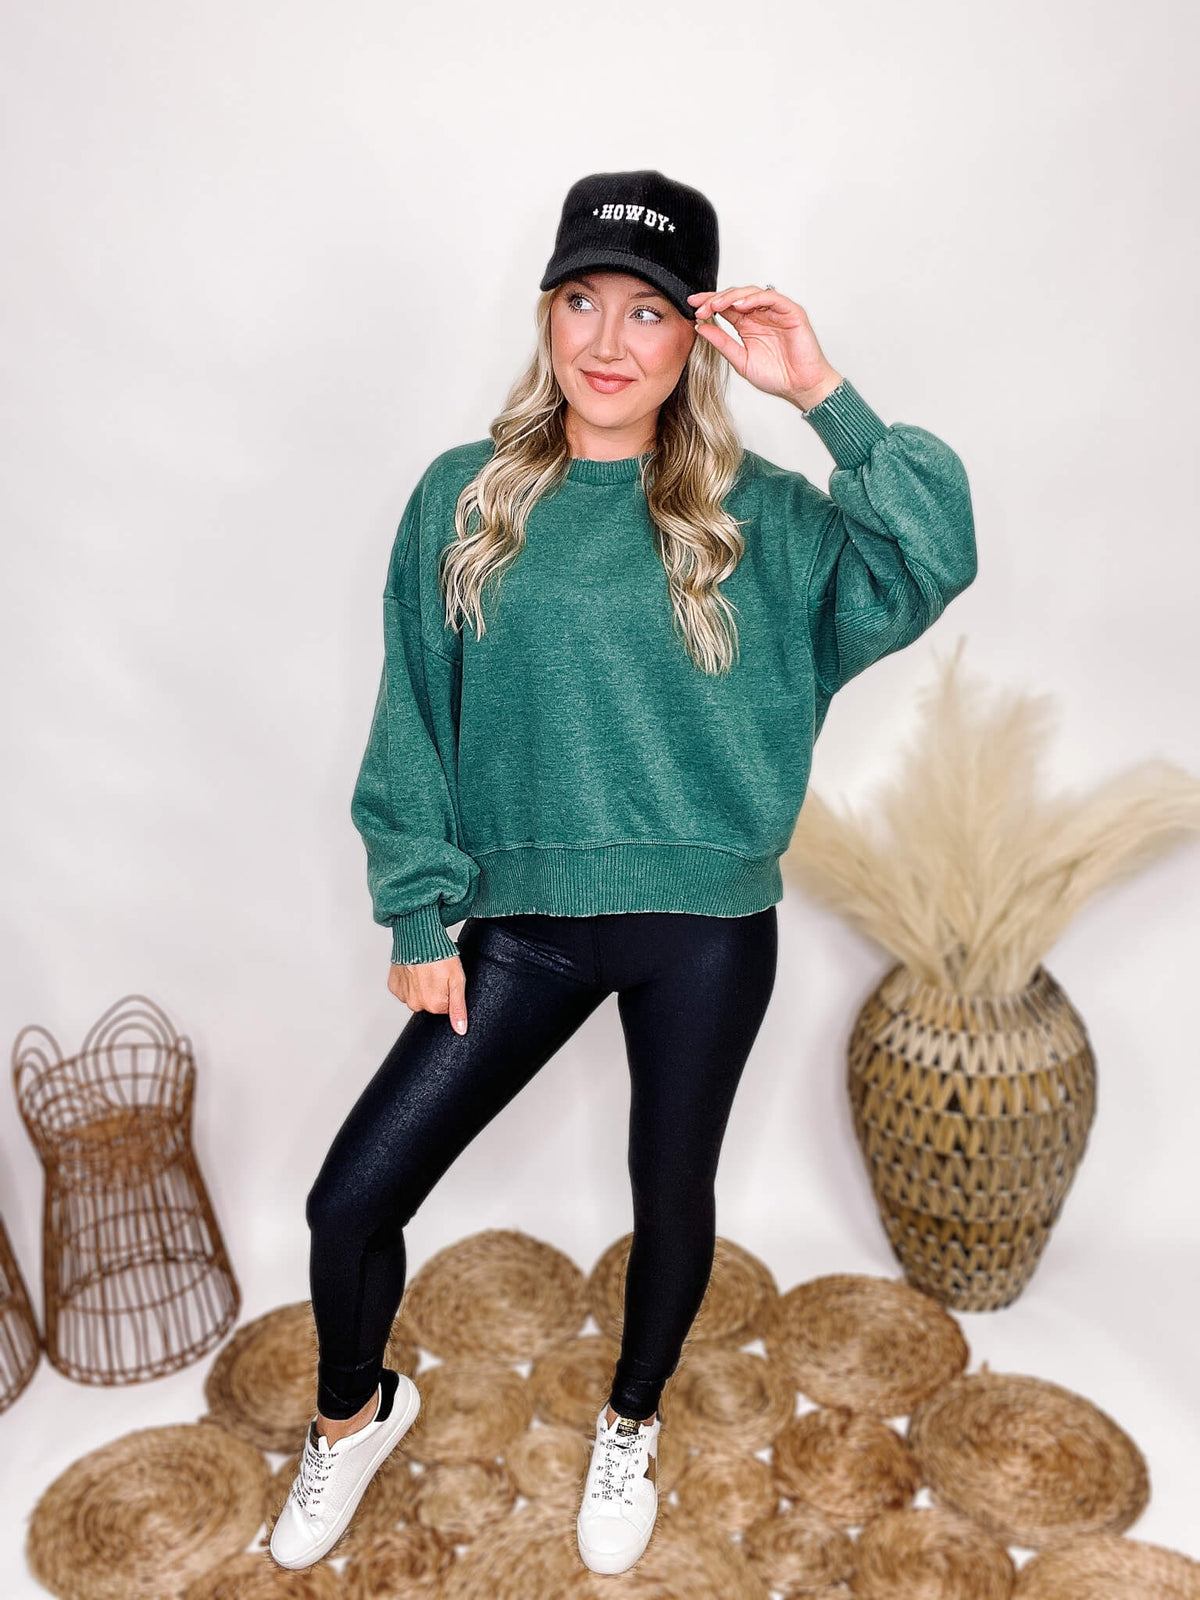 Zenana Dark Green Acid Washed Fleece Lined Pullover Ribbed Cuff, Sleeve and Hem Details Oversized Fit 60% Cotton, 40& Polyester